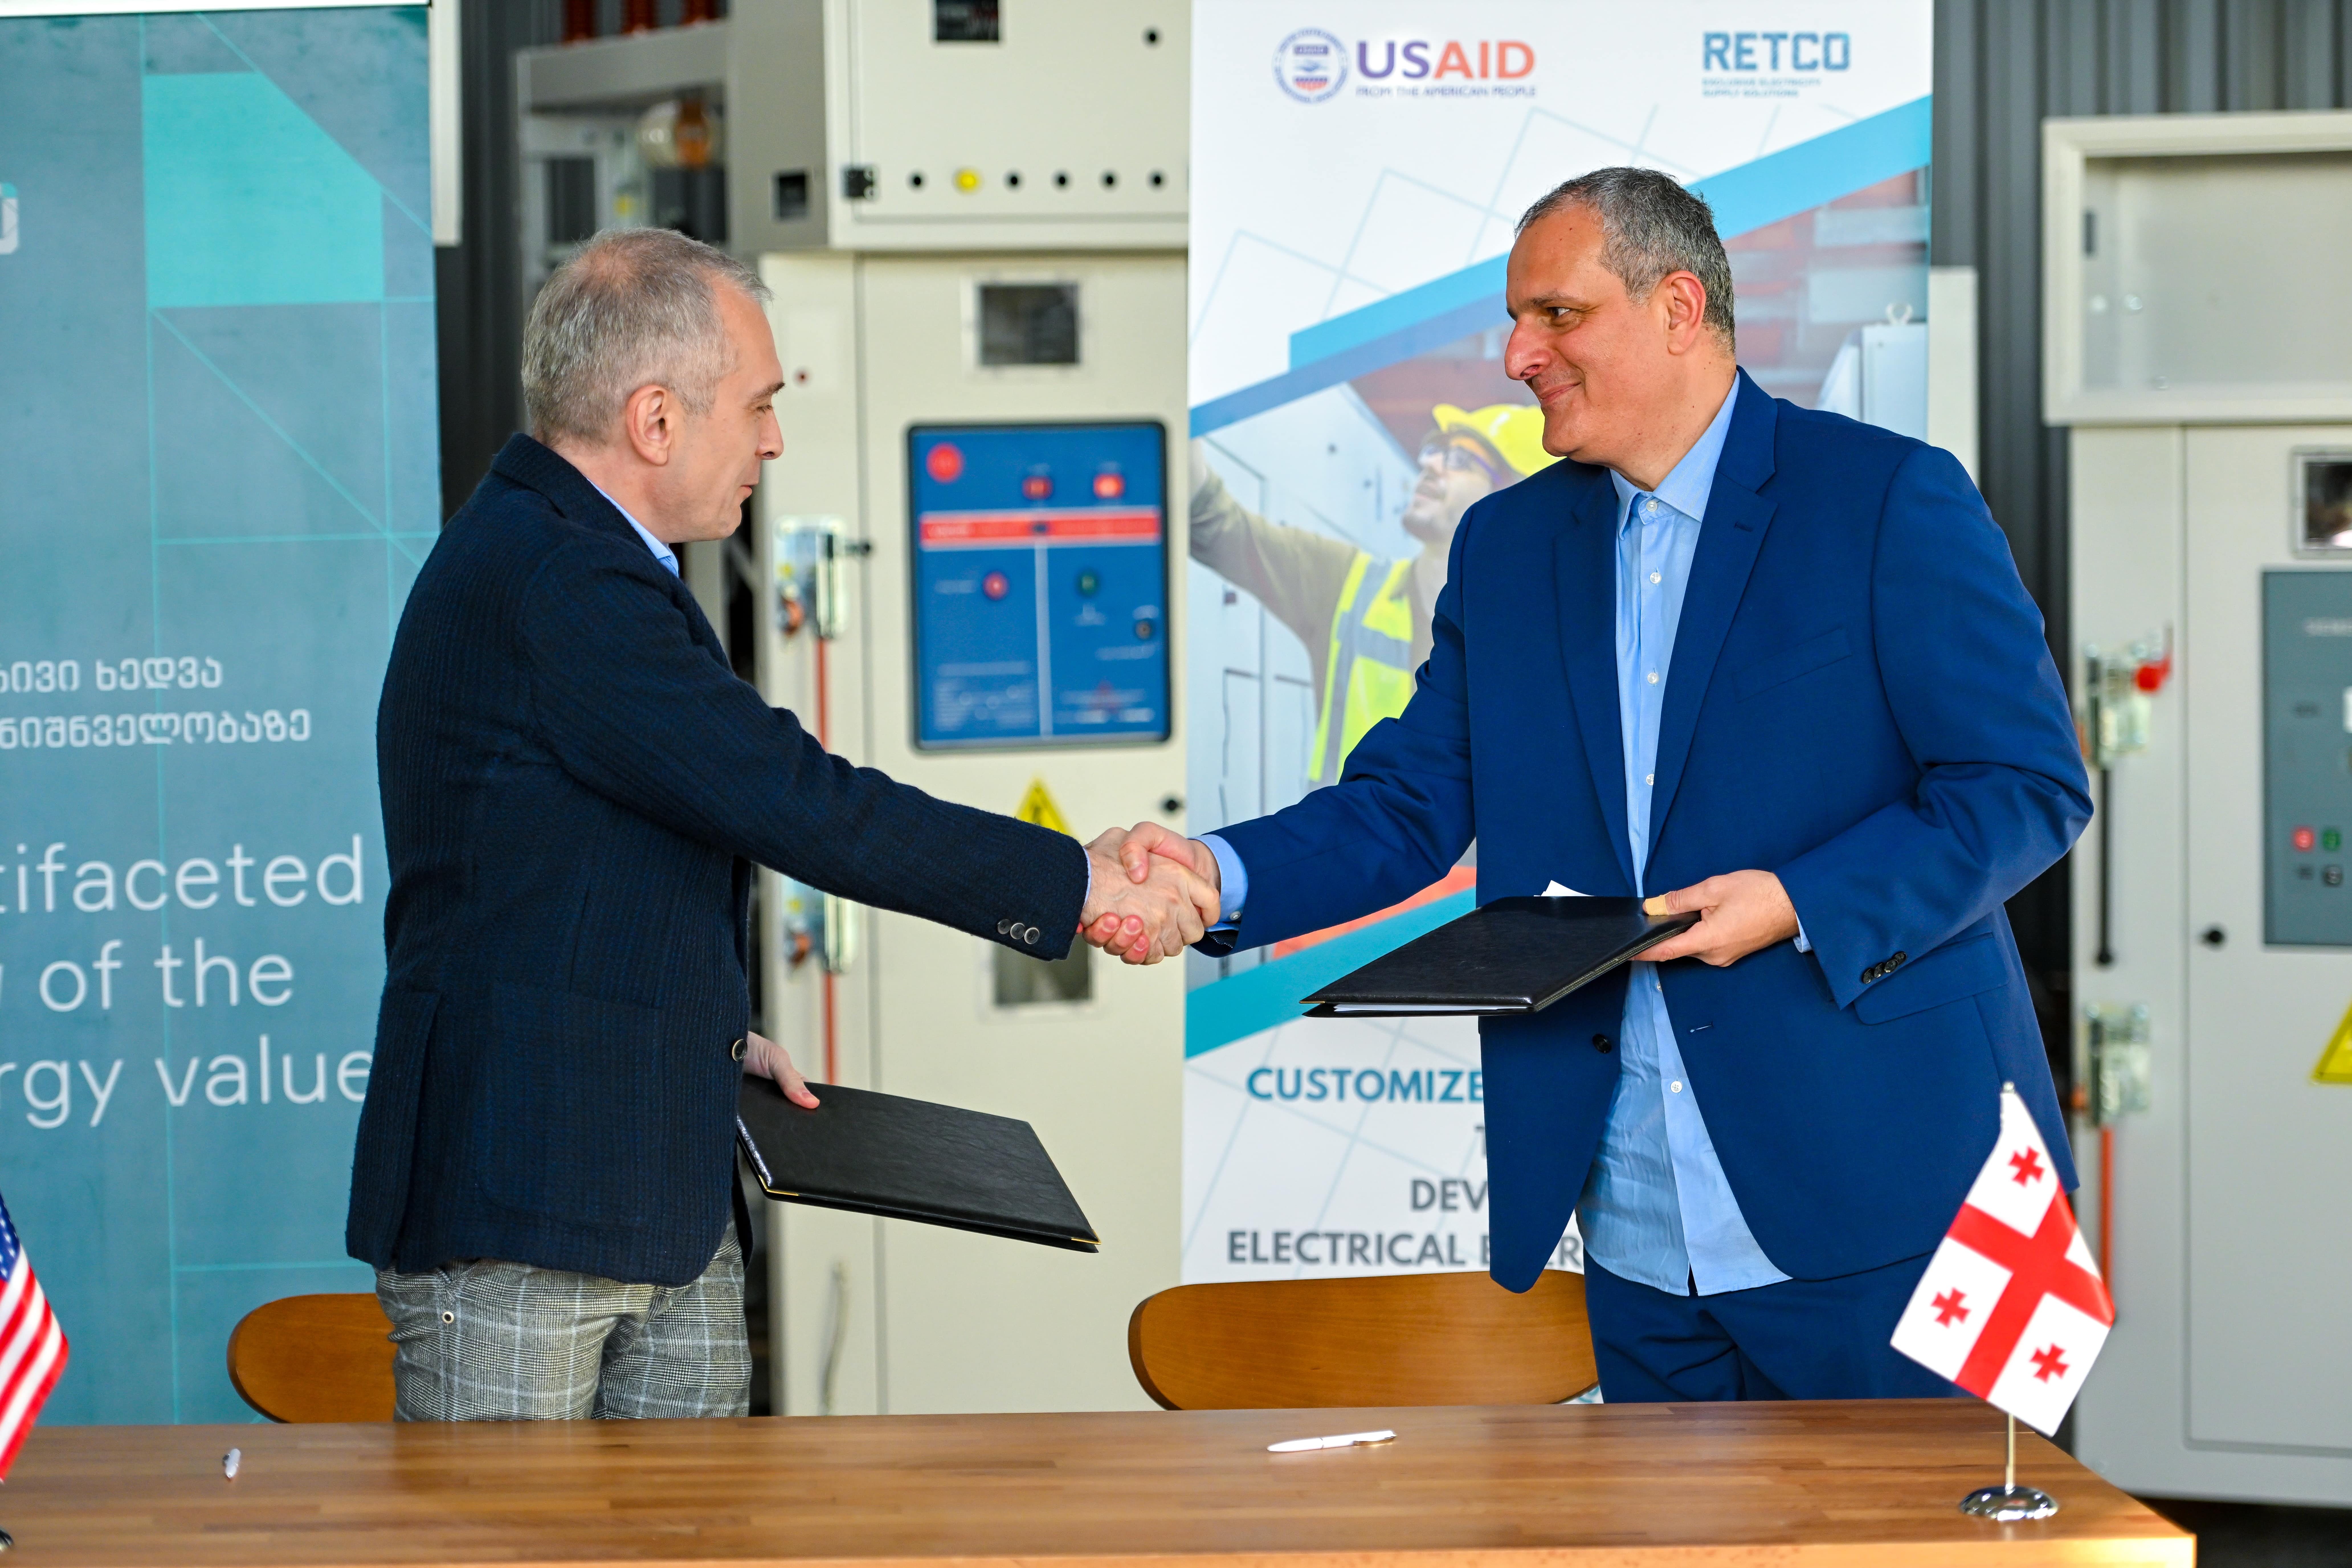 A partnership agreement has been signed between RETCO and the The USAID